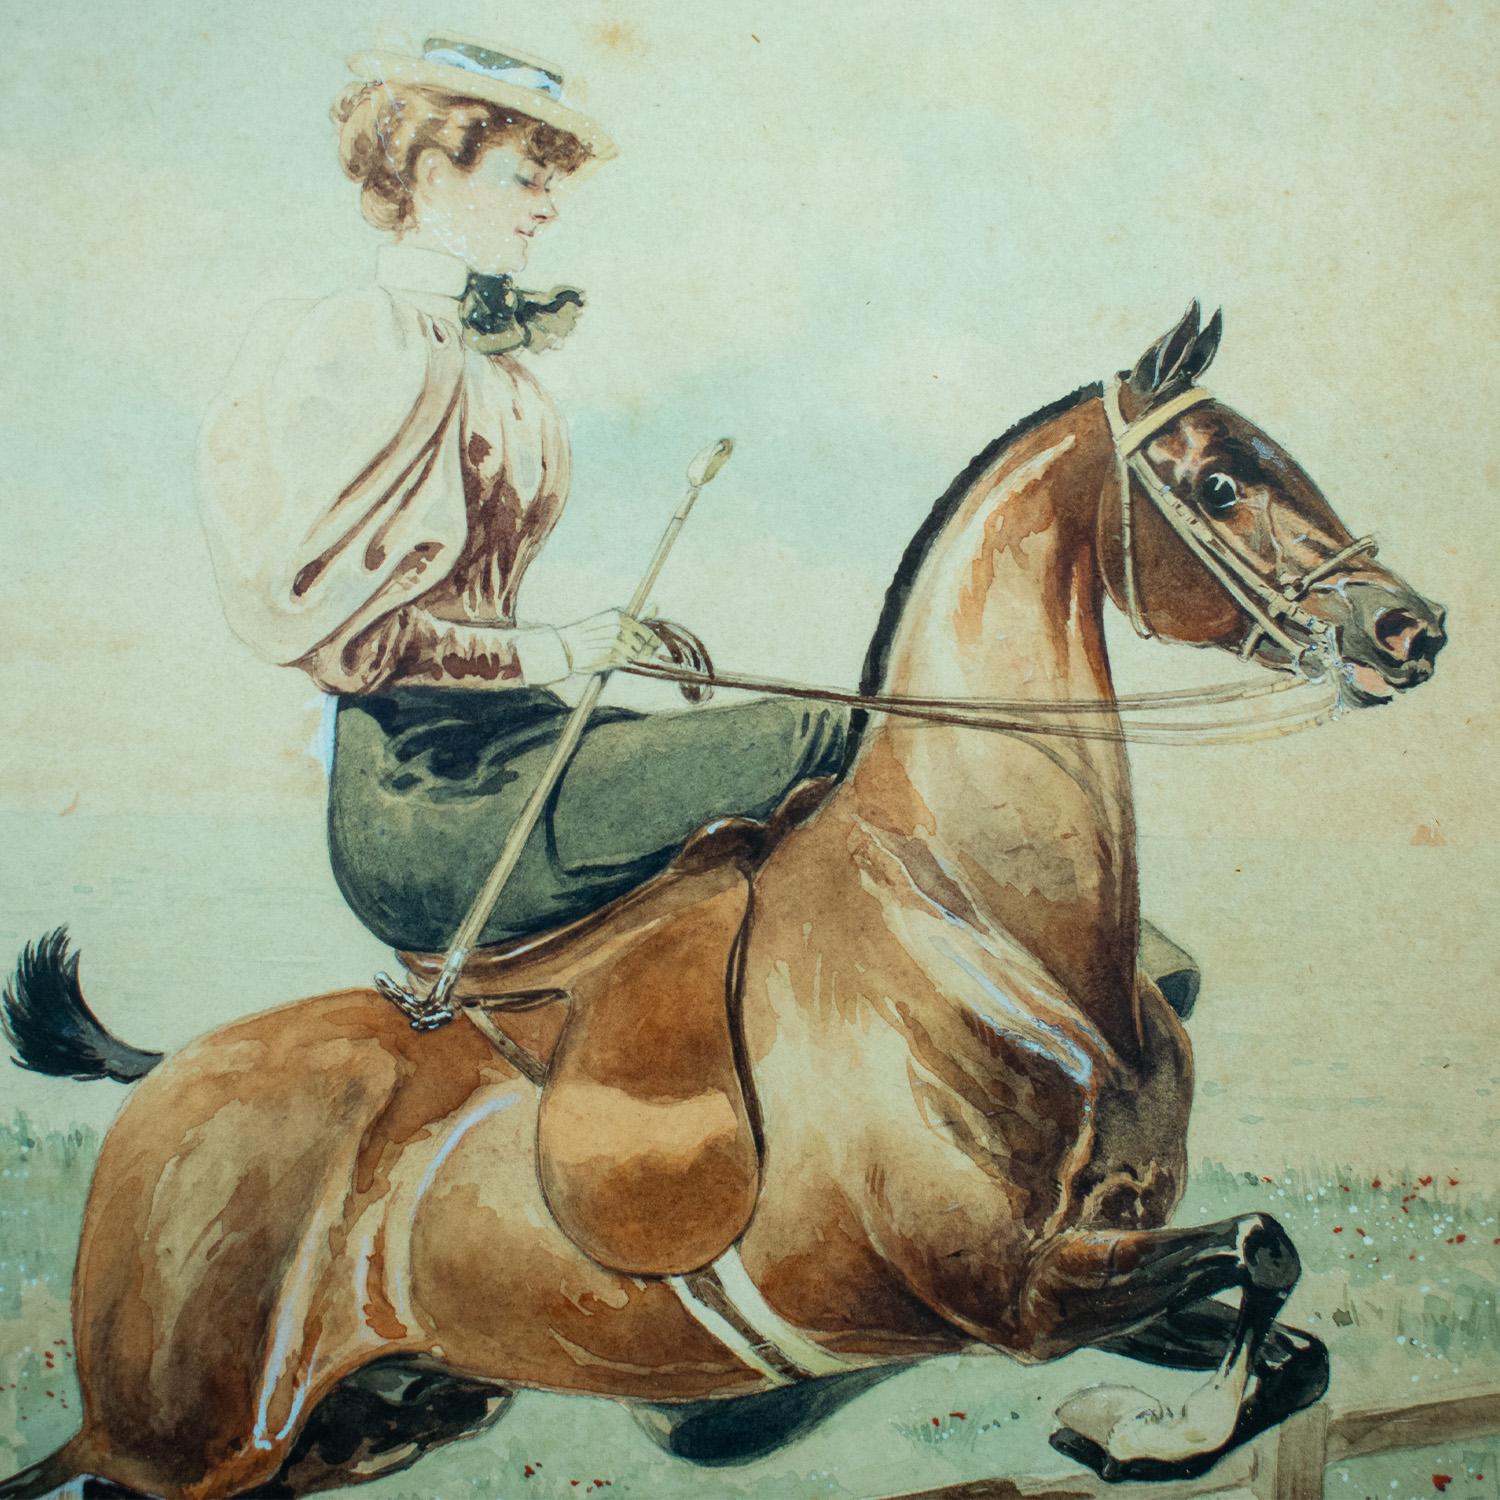 Louis VALLET (1856-1940)
Side-saddle lady rider jumping a fence. The rider wearing period dress with a white polka dot veil.
Watercolour signed and dated lower right - 1895.
Size: 38 x 25.5cm

Framed and mounted in a very attractive period moulded